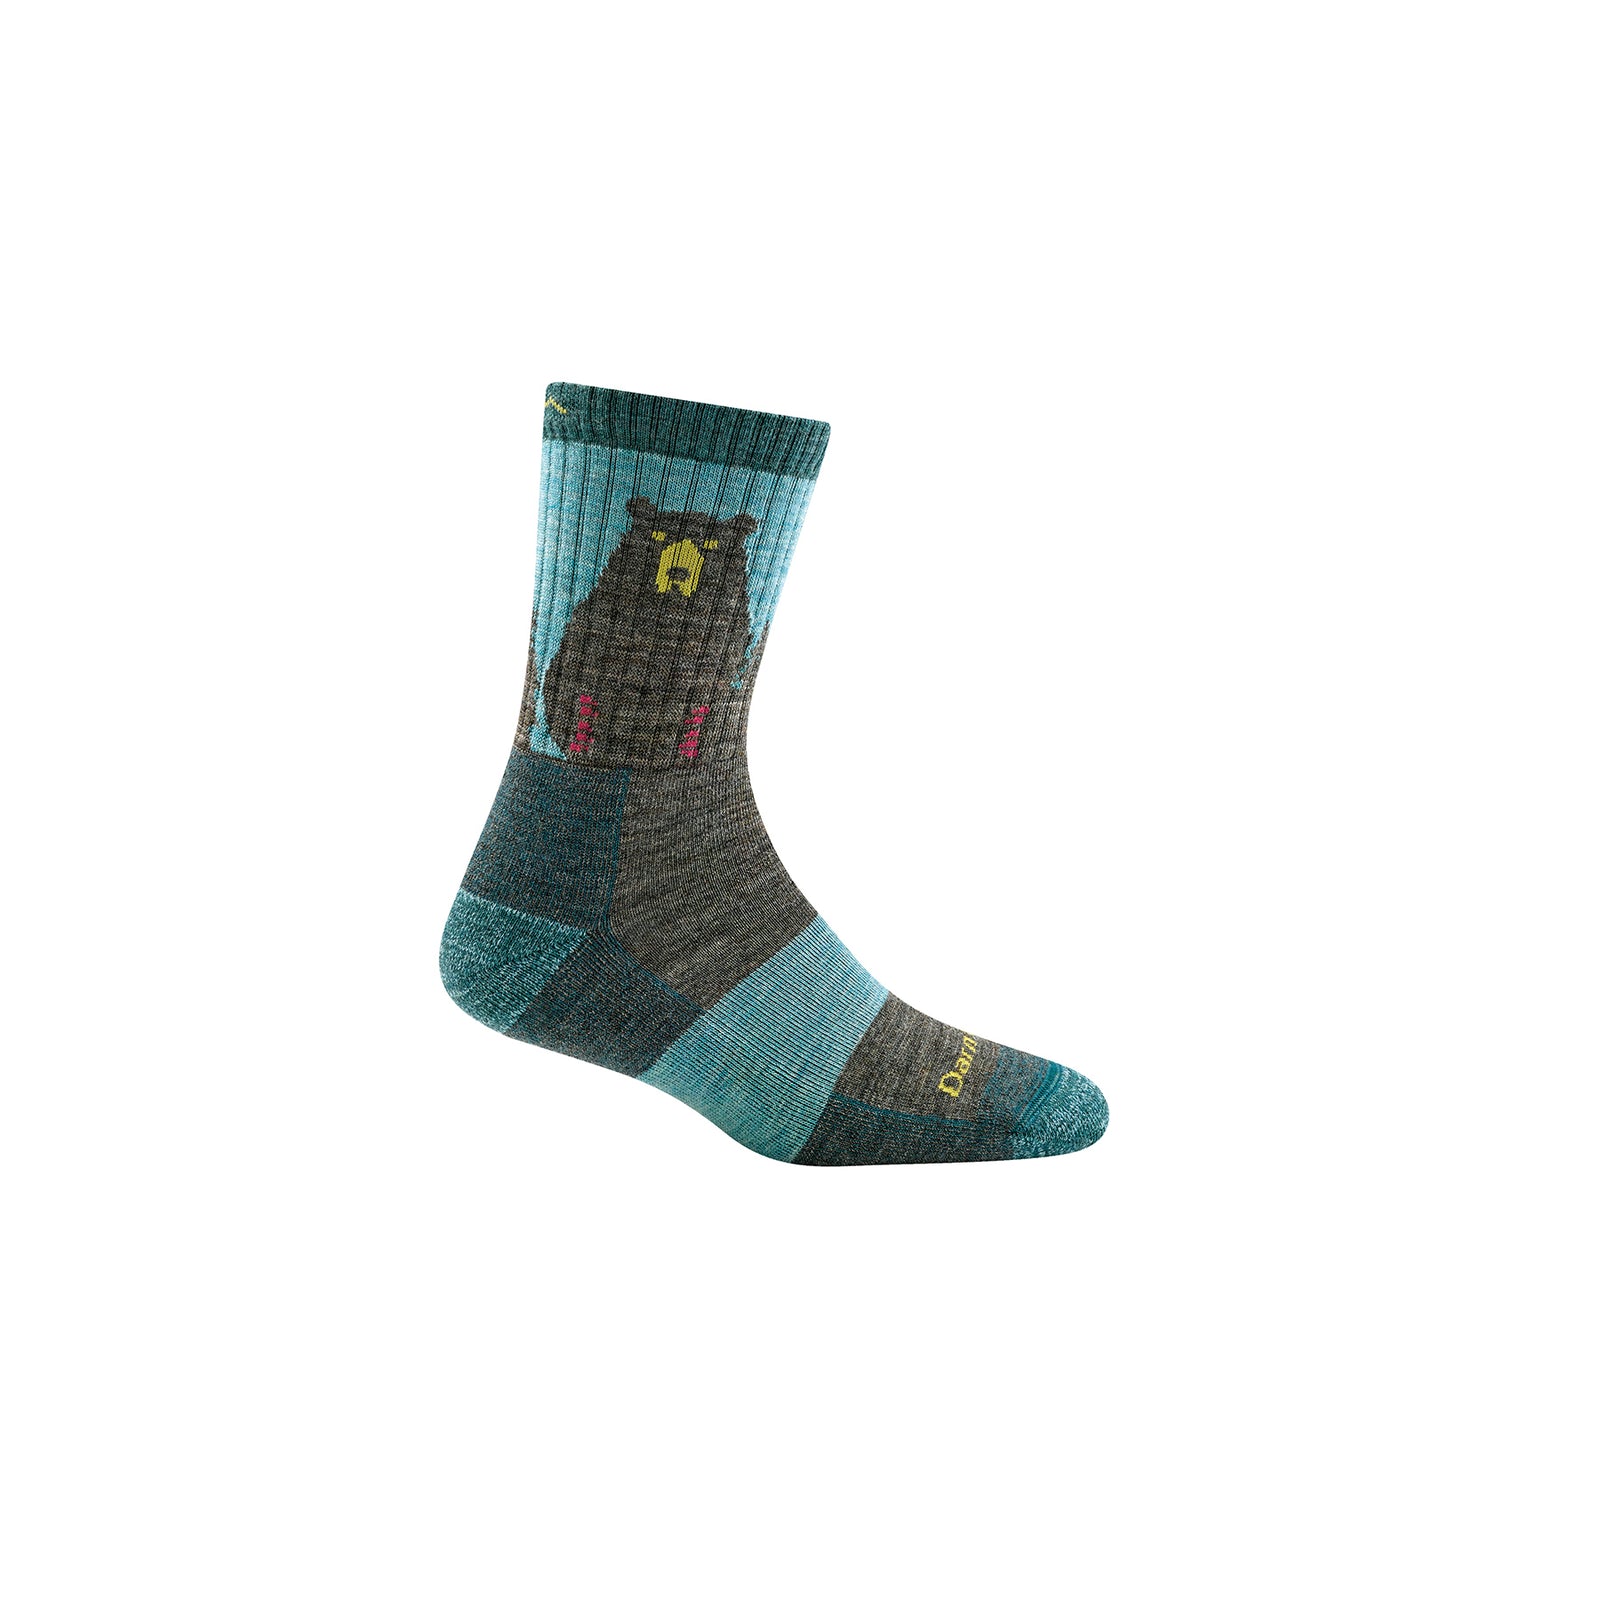 sideview of bear town light cushion women's in aqua and brown with bear graphic on ankles